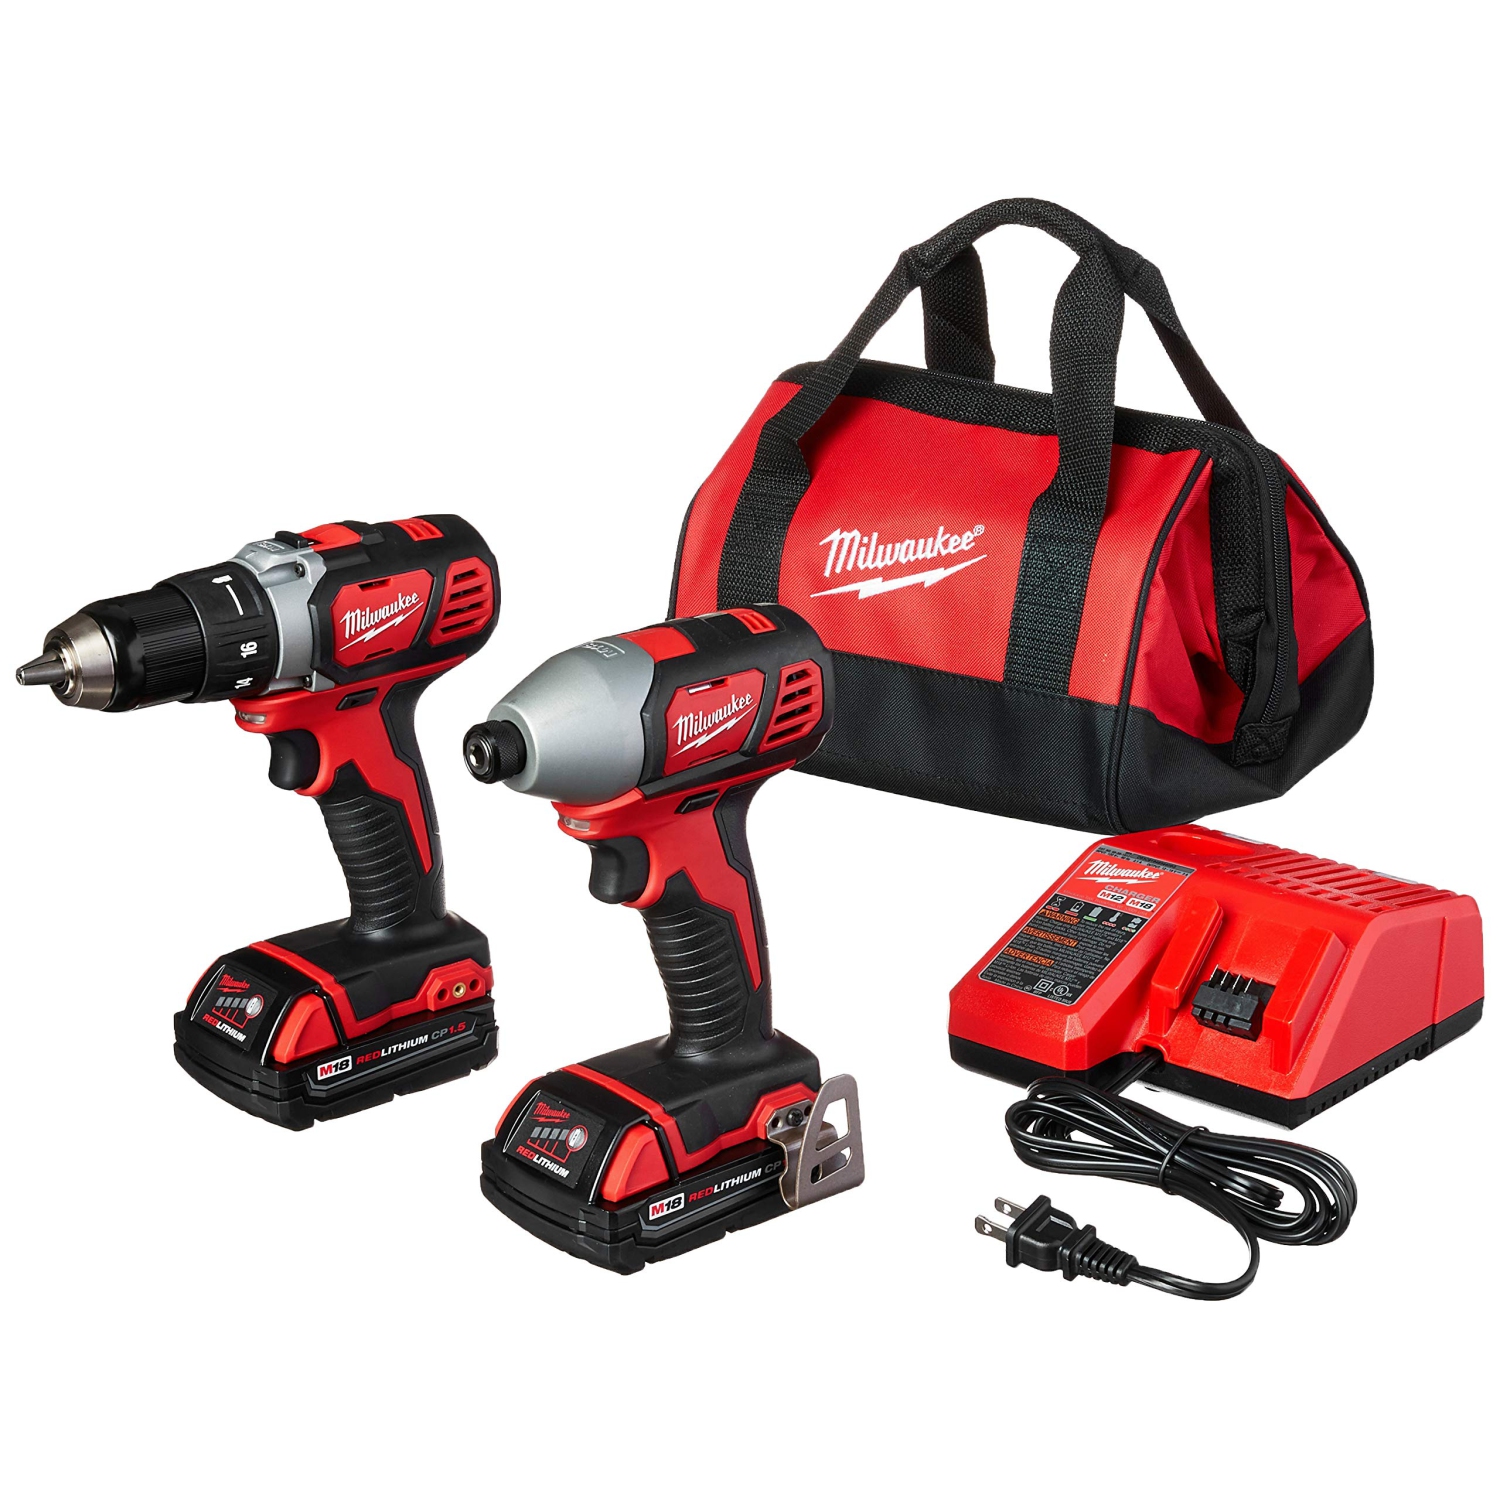 New Milwaukee 2691-22 18-Volt Compact Drill and Impact Driver Combo Kit